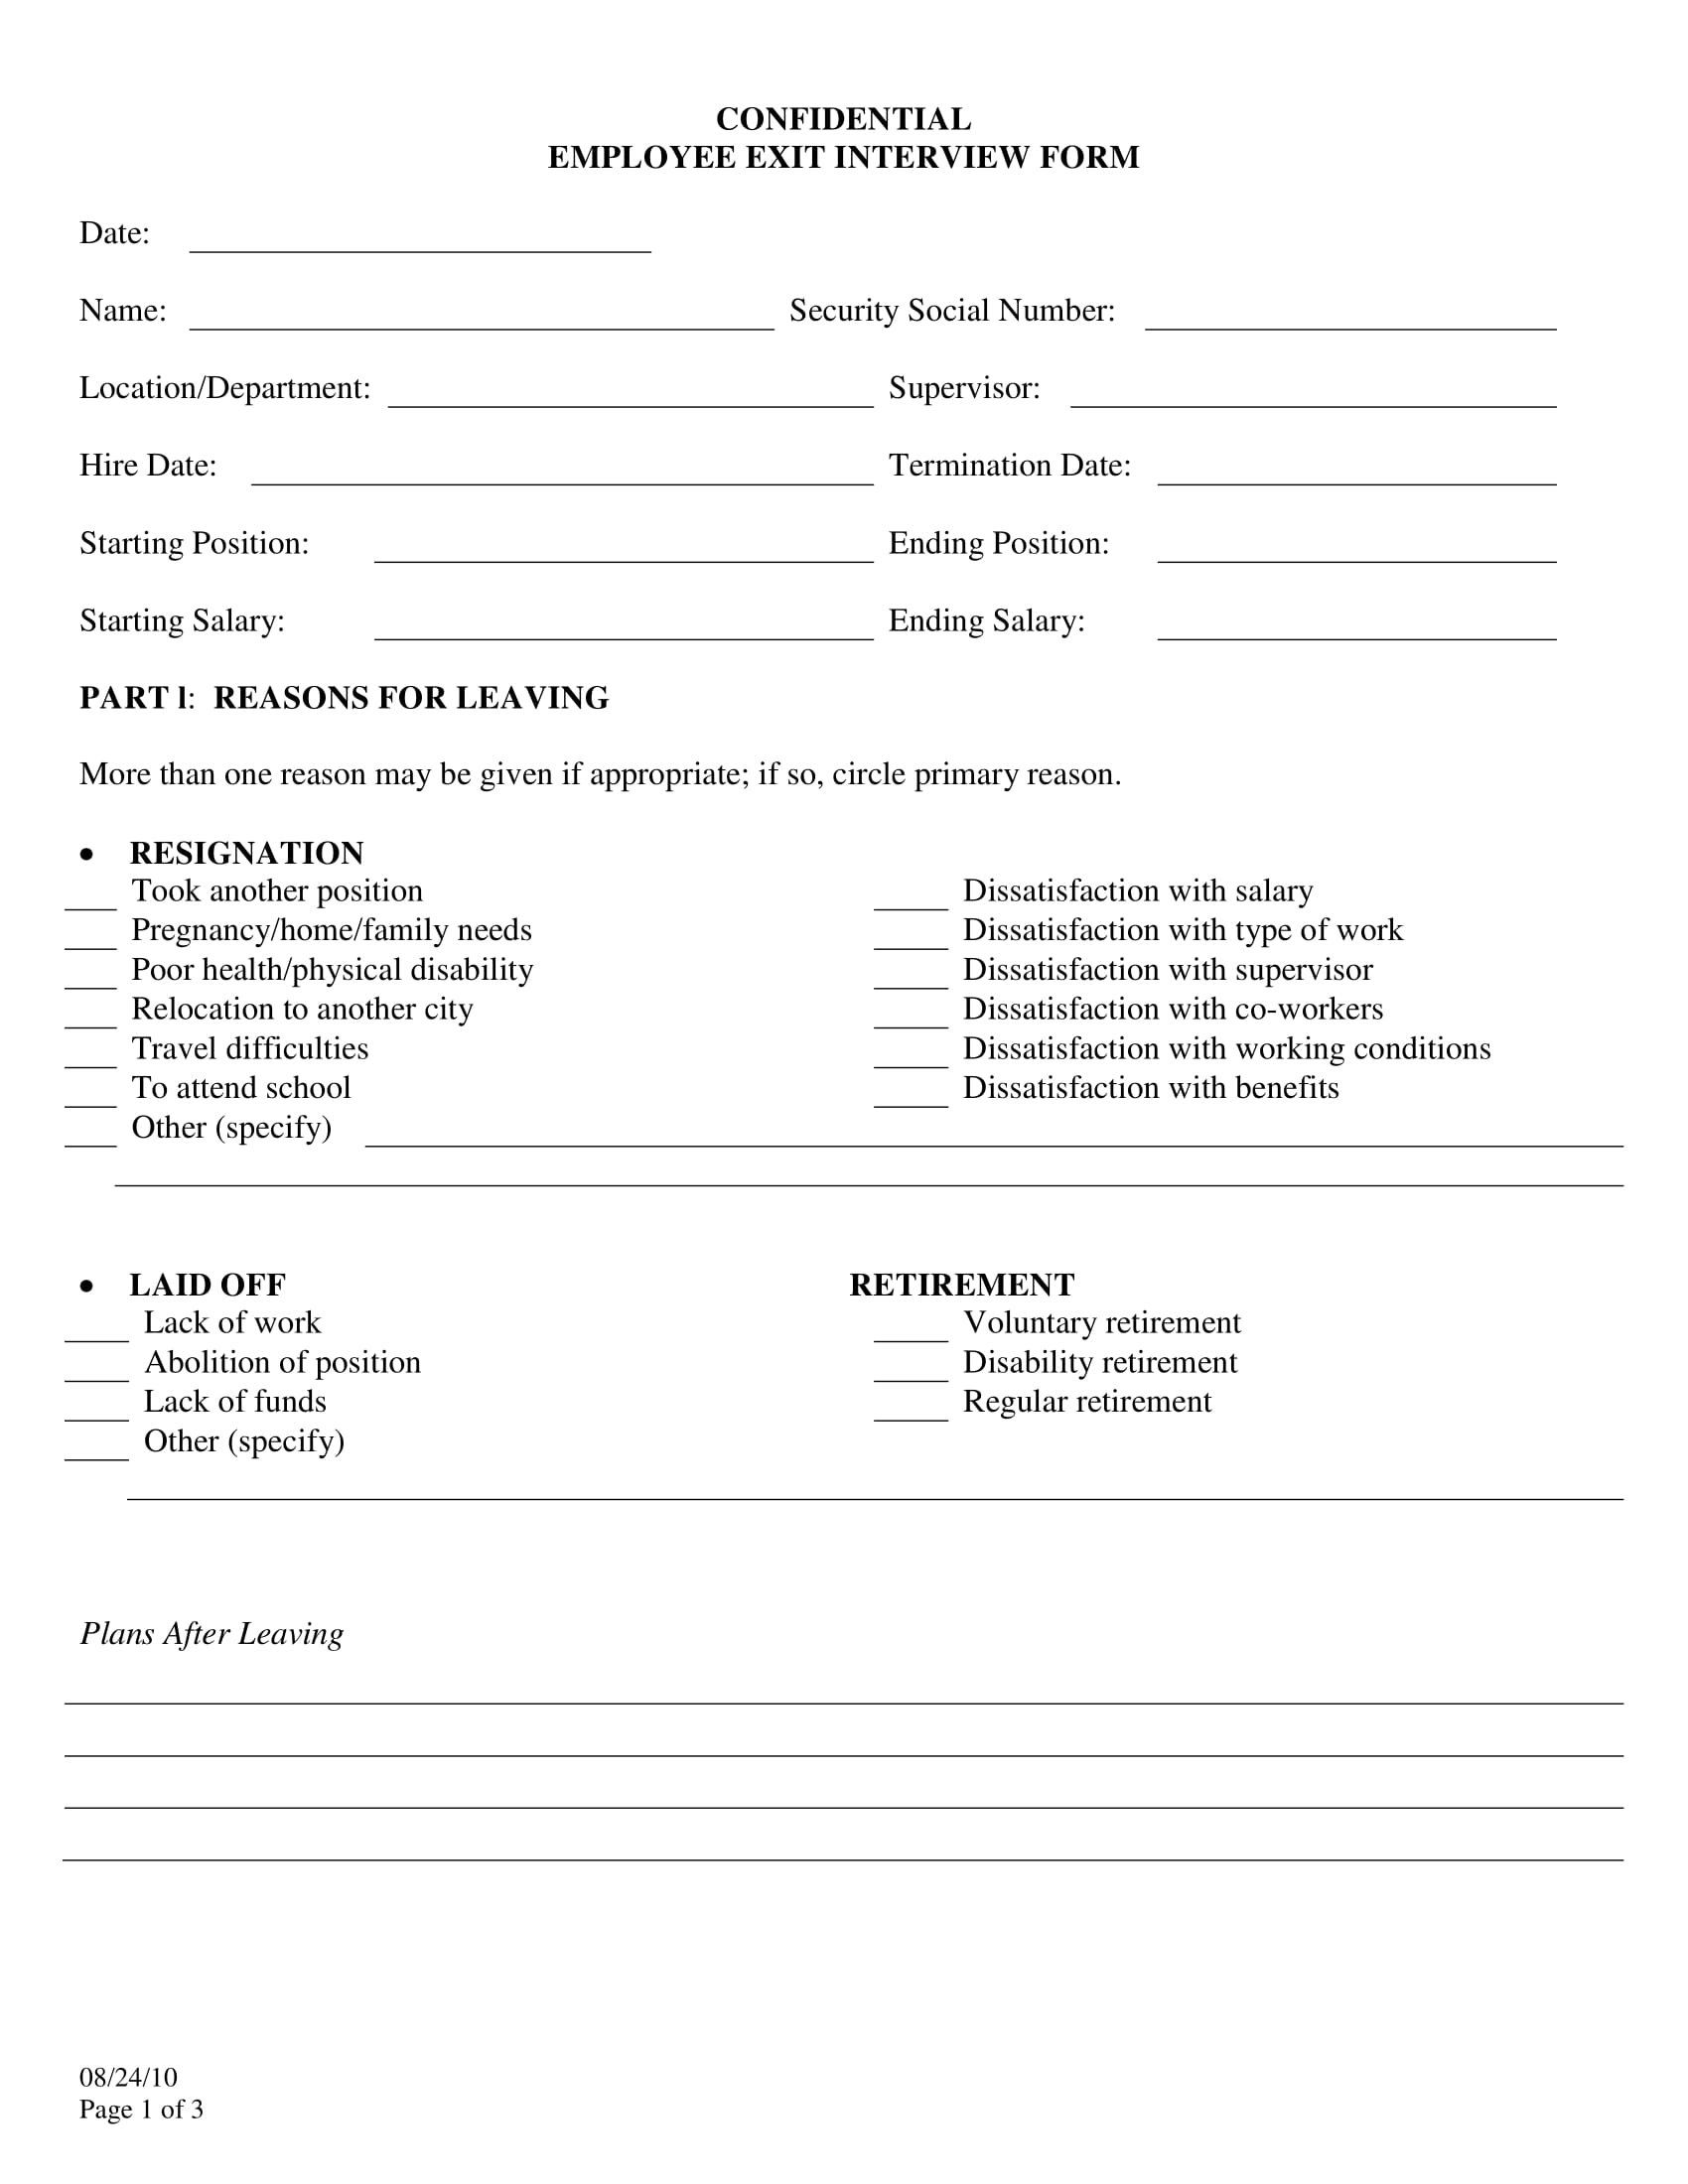 9+ Exit Interview Form Examples - PDF | Examples